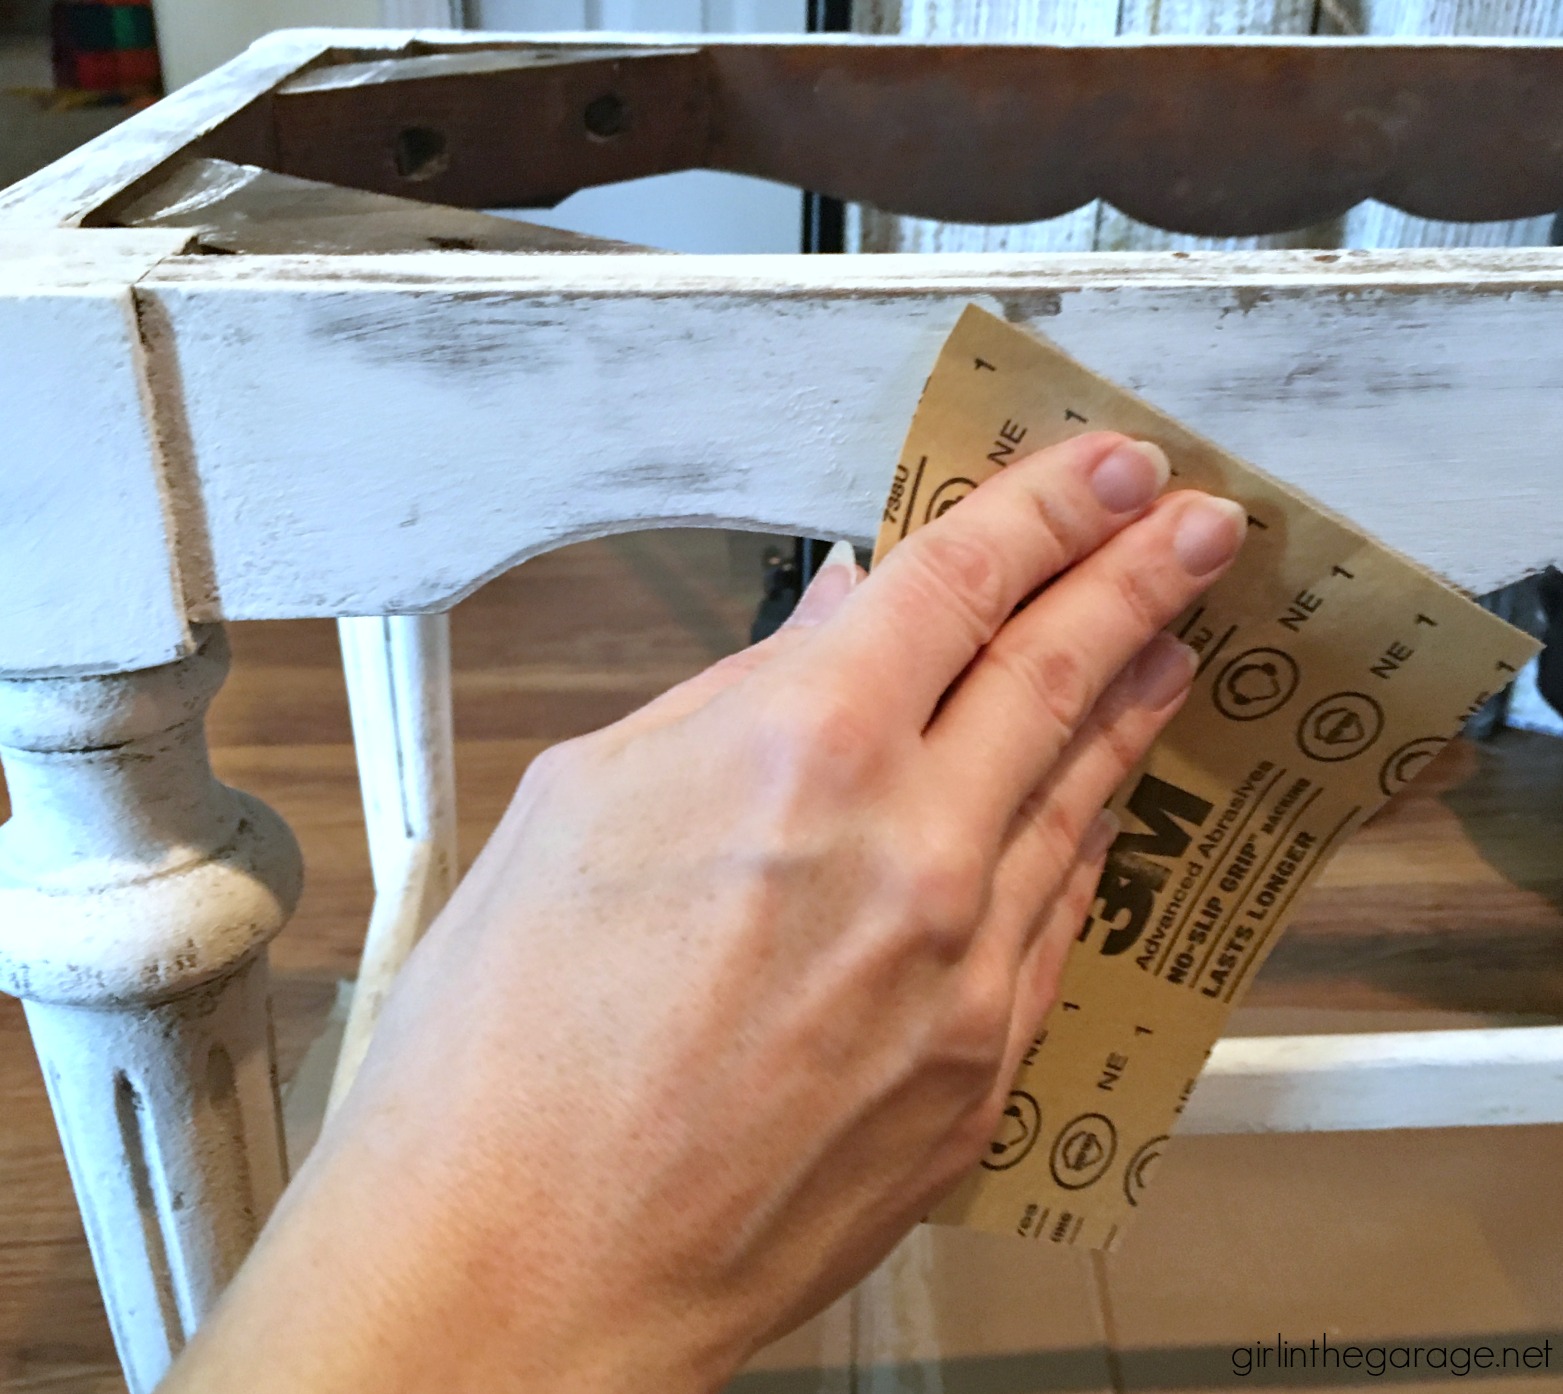 How to make a DIY French grain sack with drop cloth and a stencil - Step by step bench makeover tutorial by Girl in the Garage